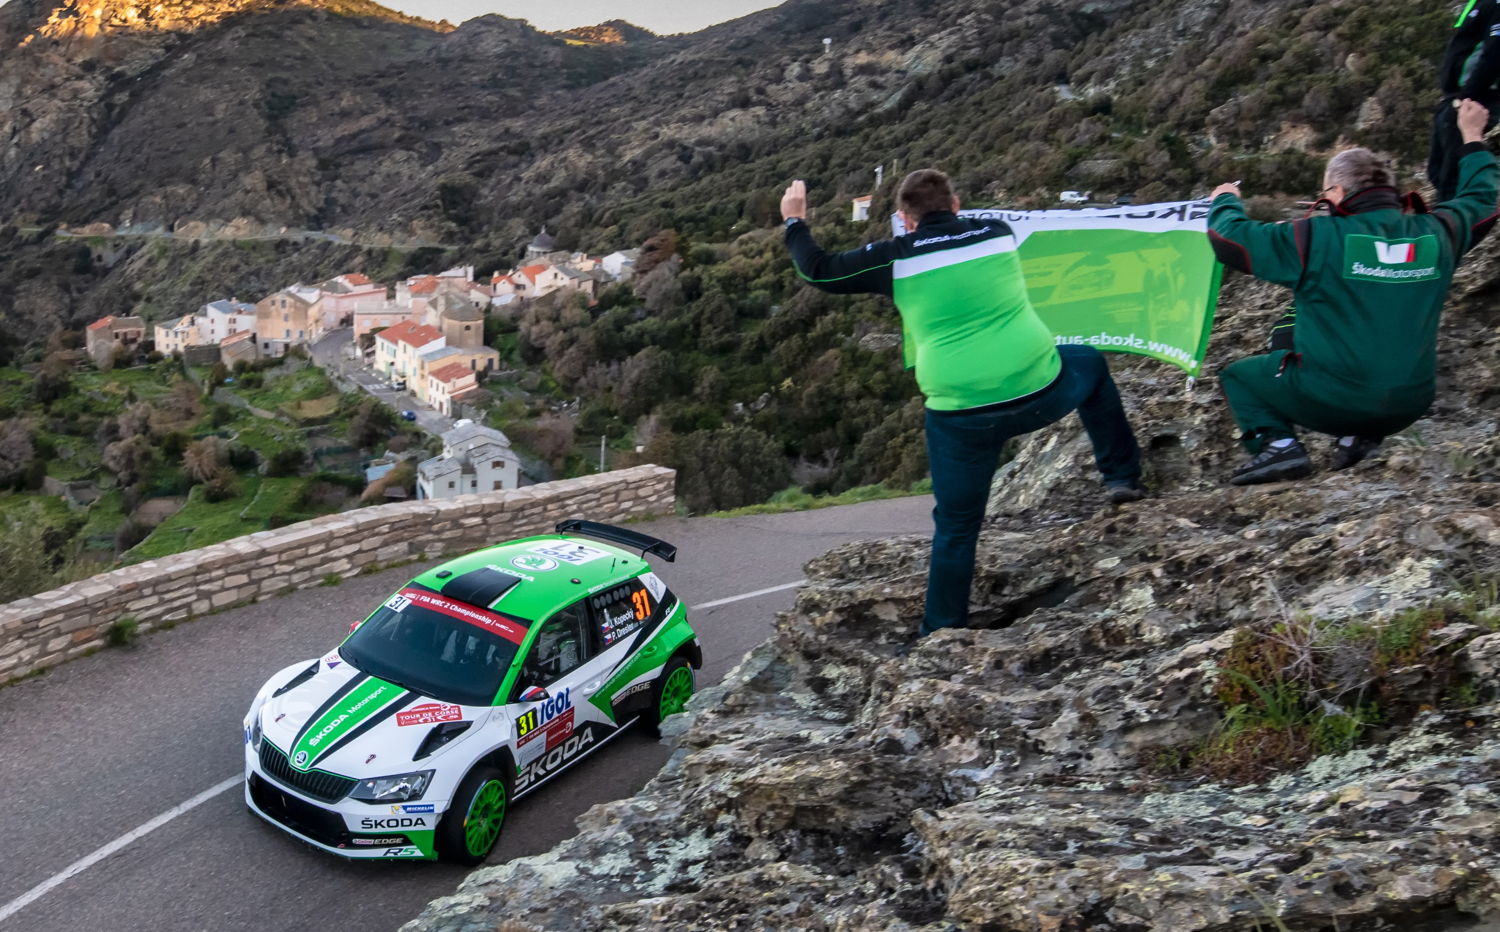 Jan Kopecký/Pavel Dresler (CZE/CZE), competing in a ŠKODA FABIA R5, are dominating the WRC 2 category at Rally France/Tour de Corse after day two